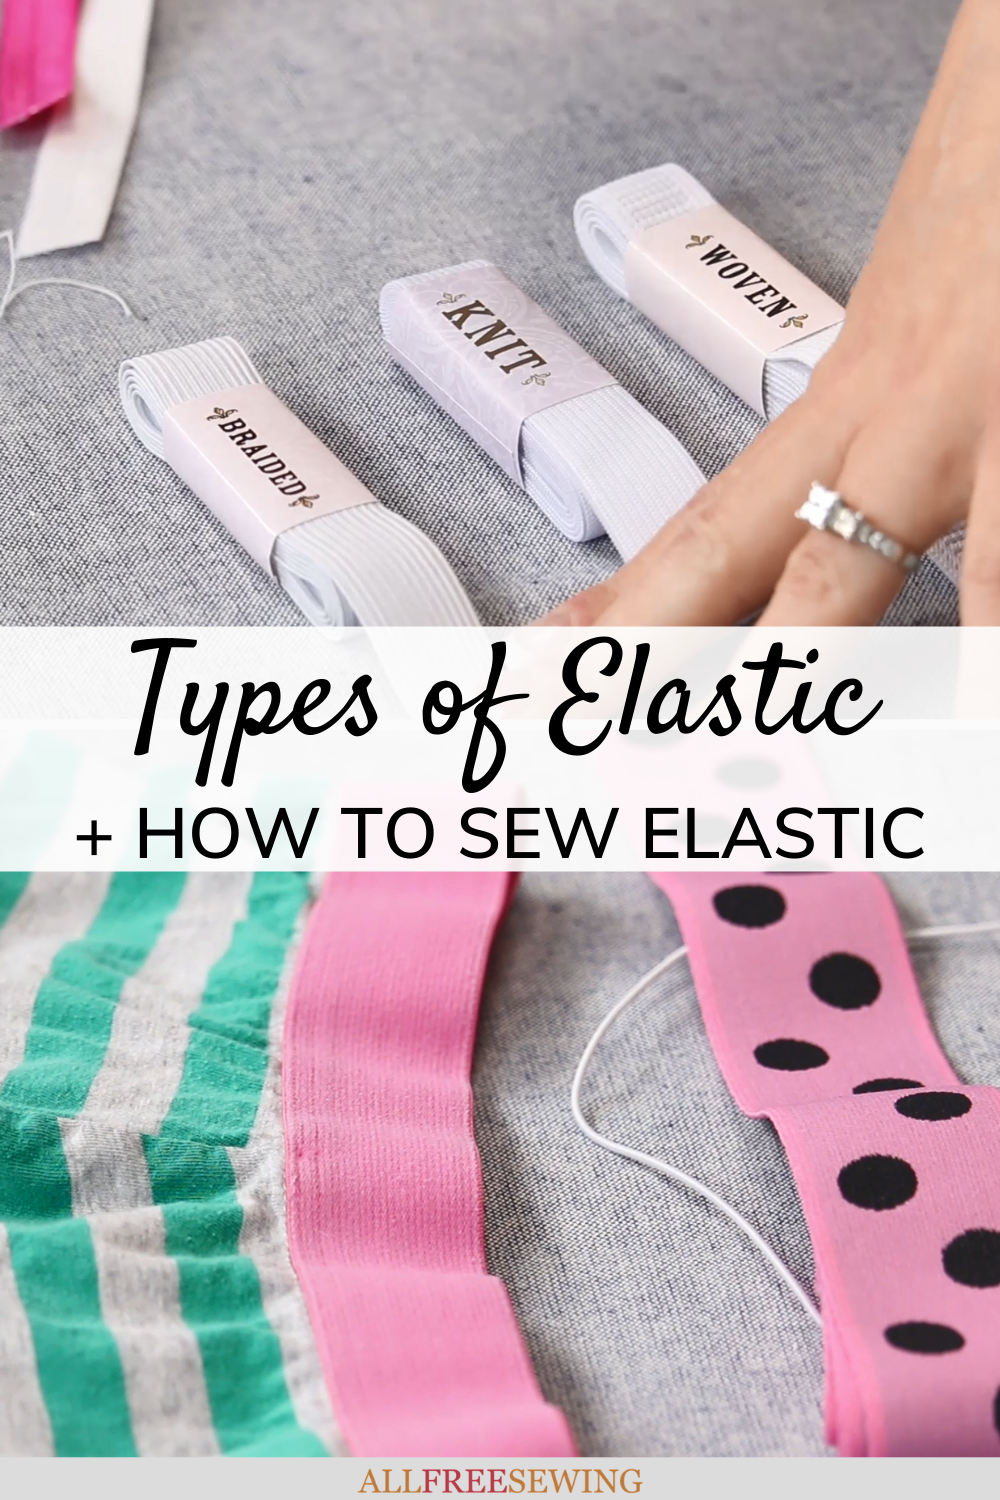 4 Types of Elastic and what they are used for - Sew n Sew